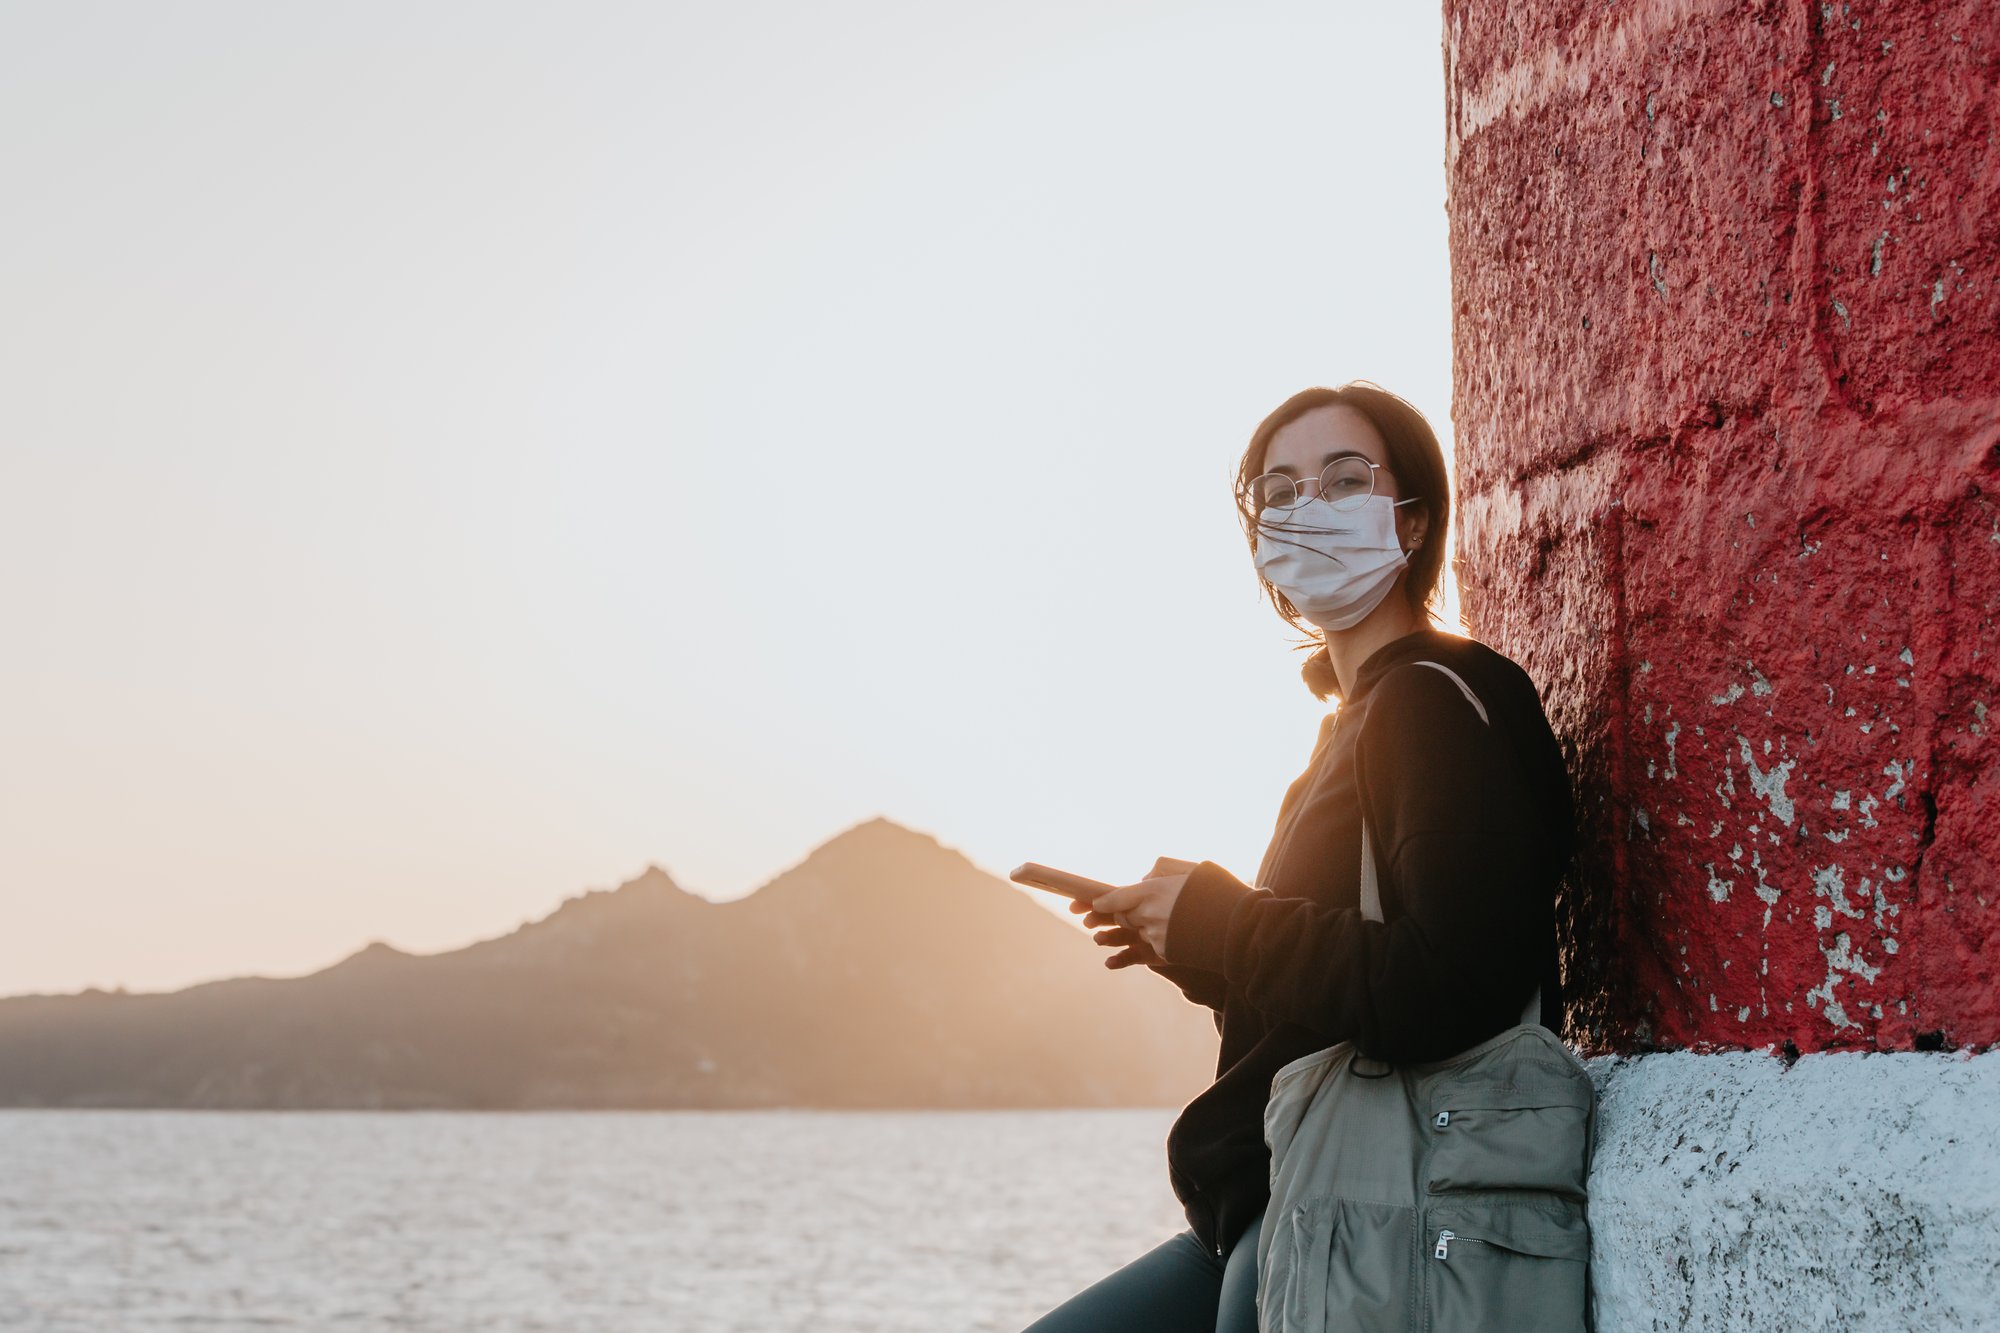 woman in facemask leans against a wall by water 戴面罩的女人靠在水边的墙上